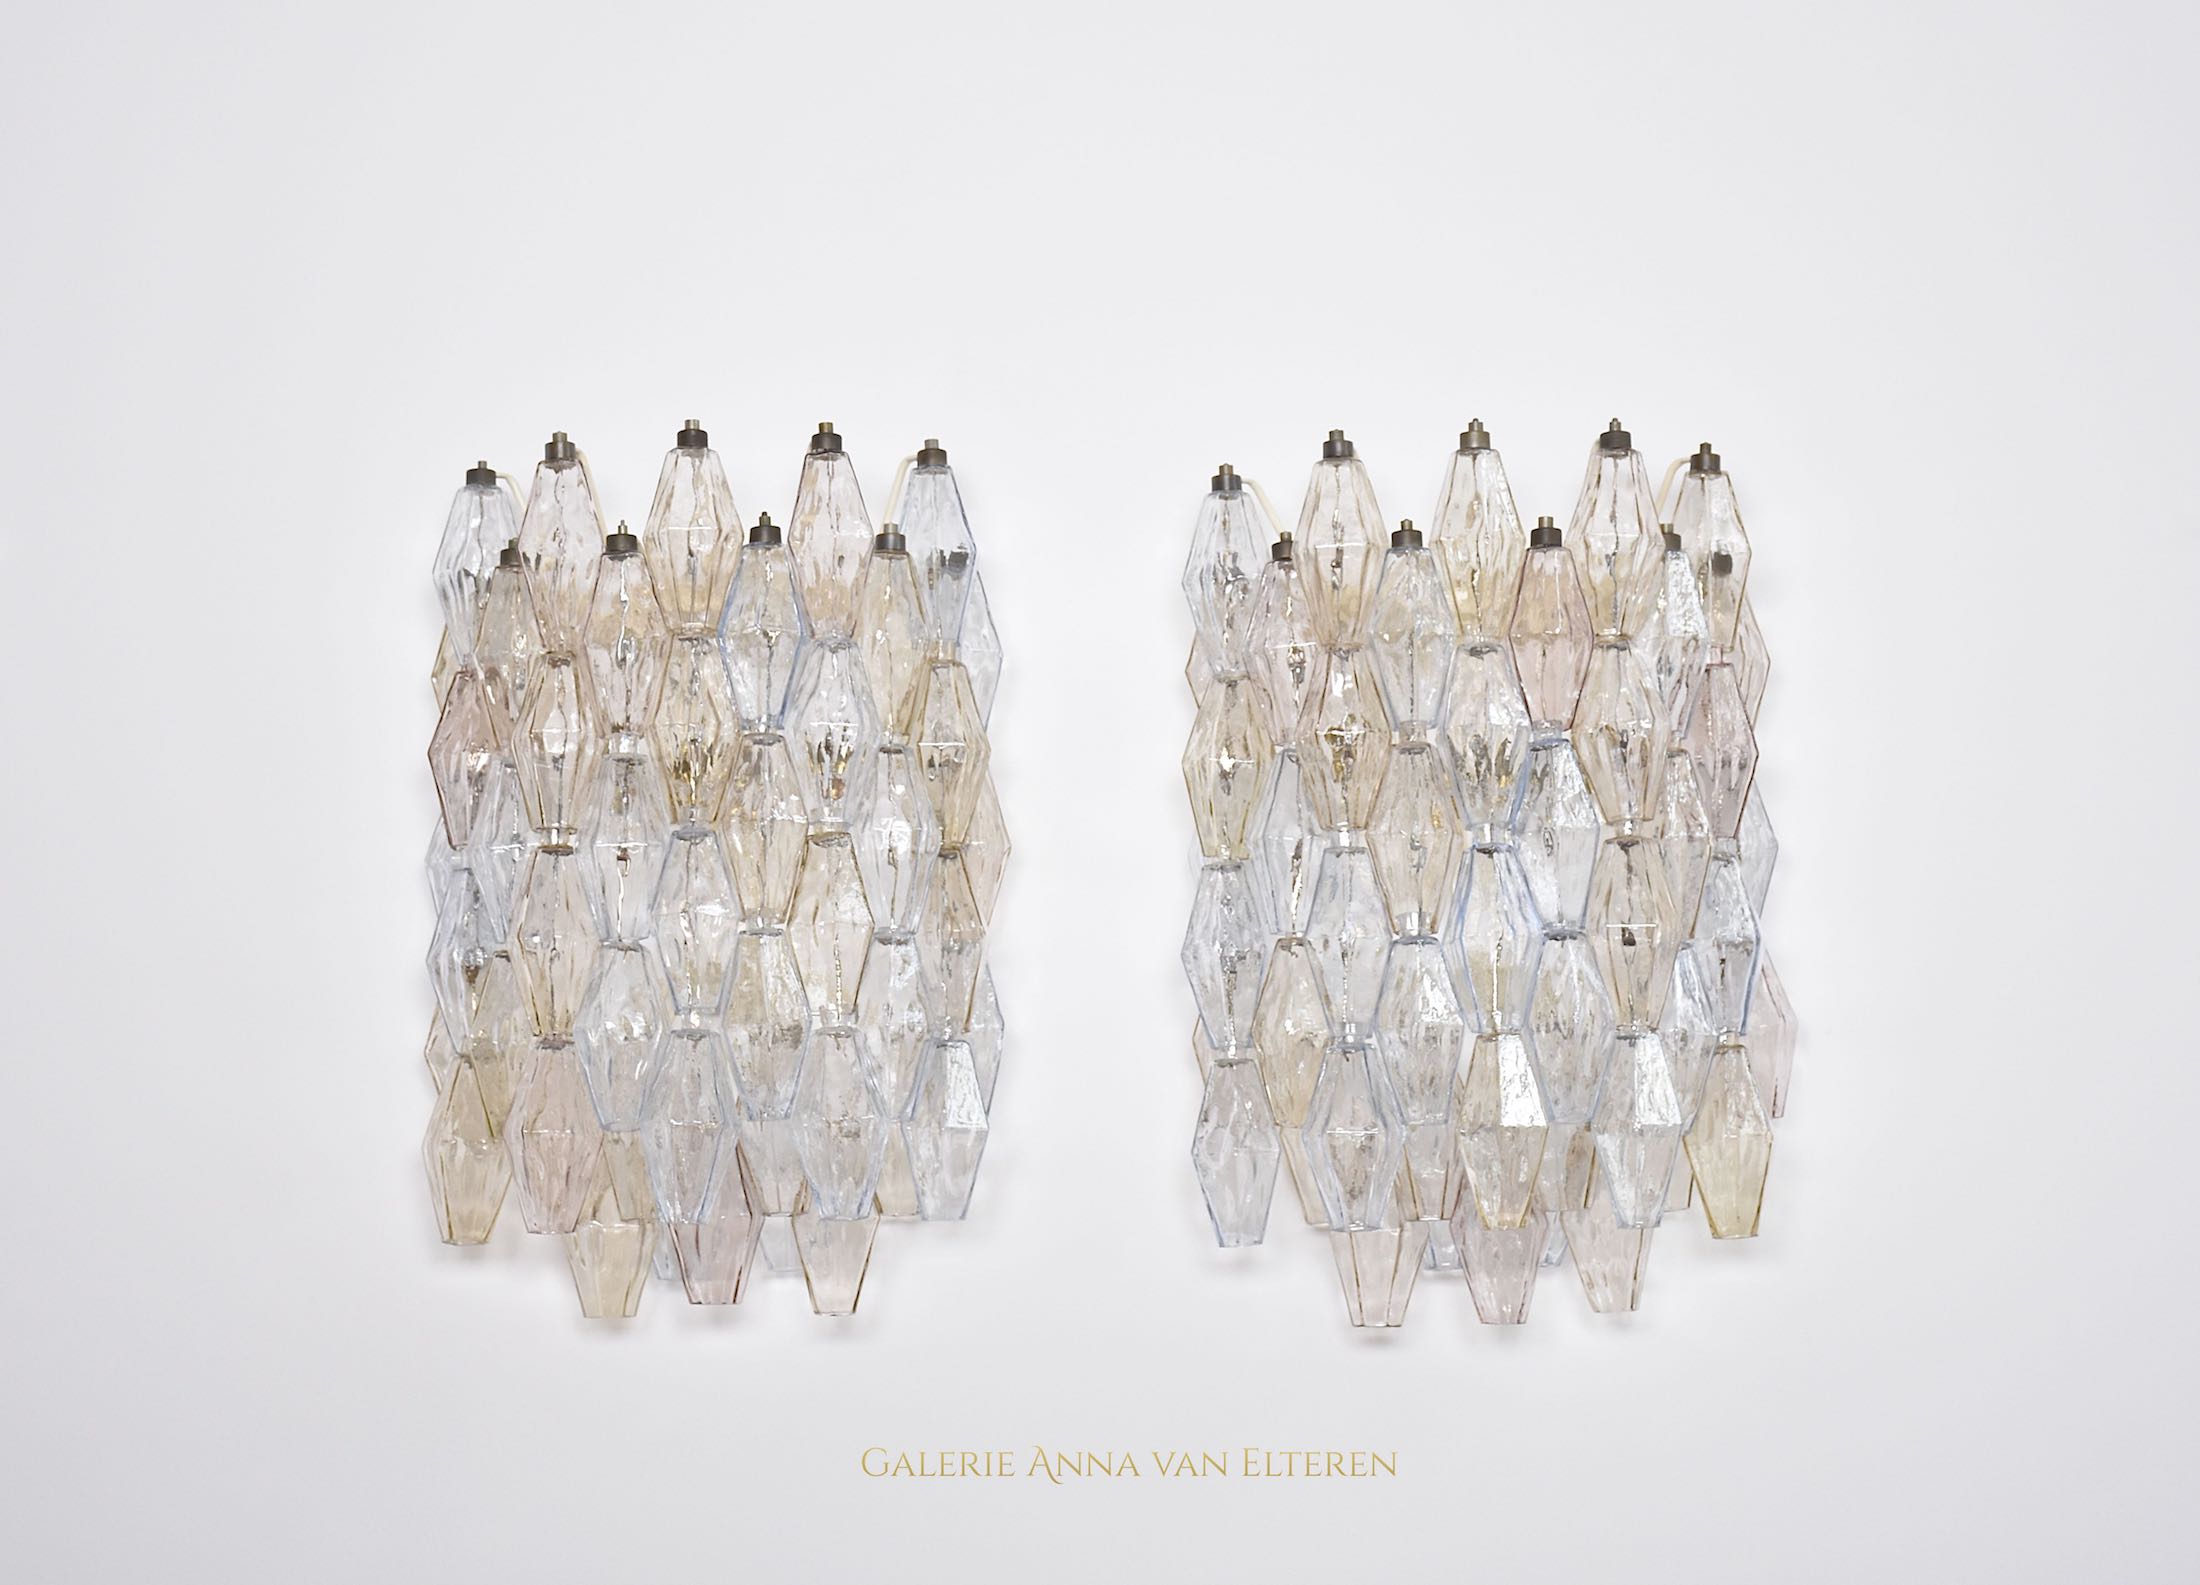 A large pair of wall lights by Venini Murano